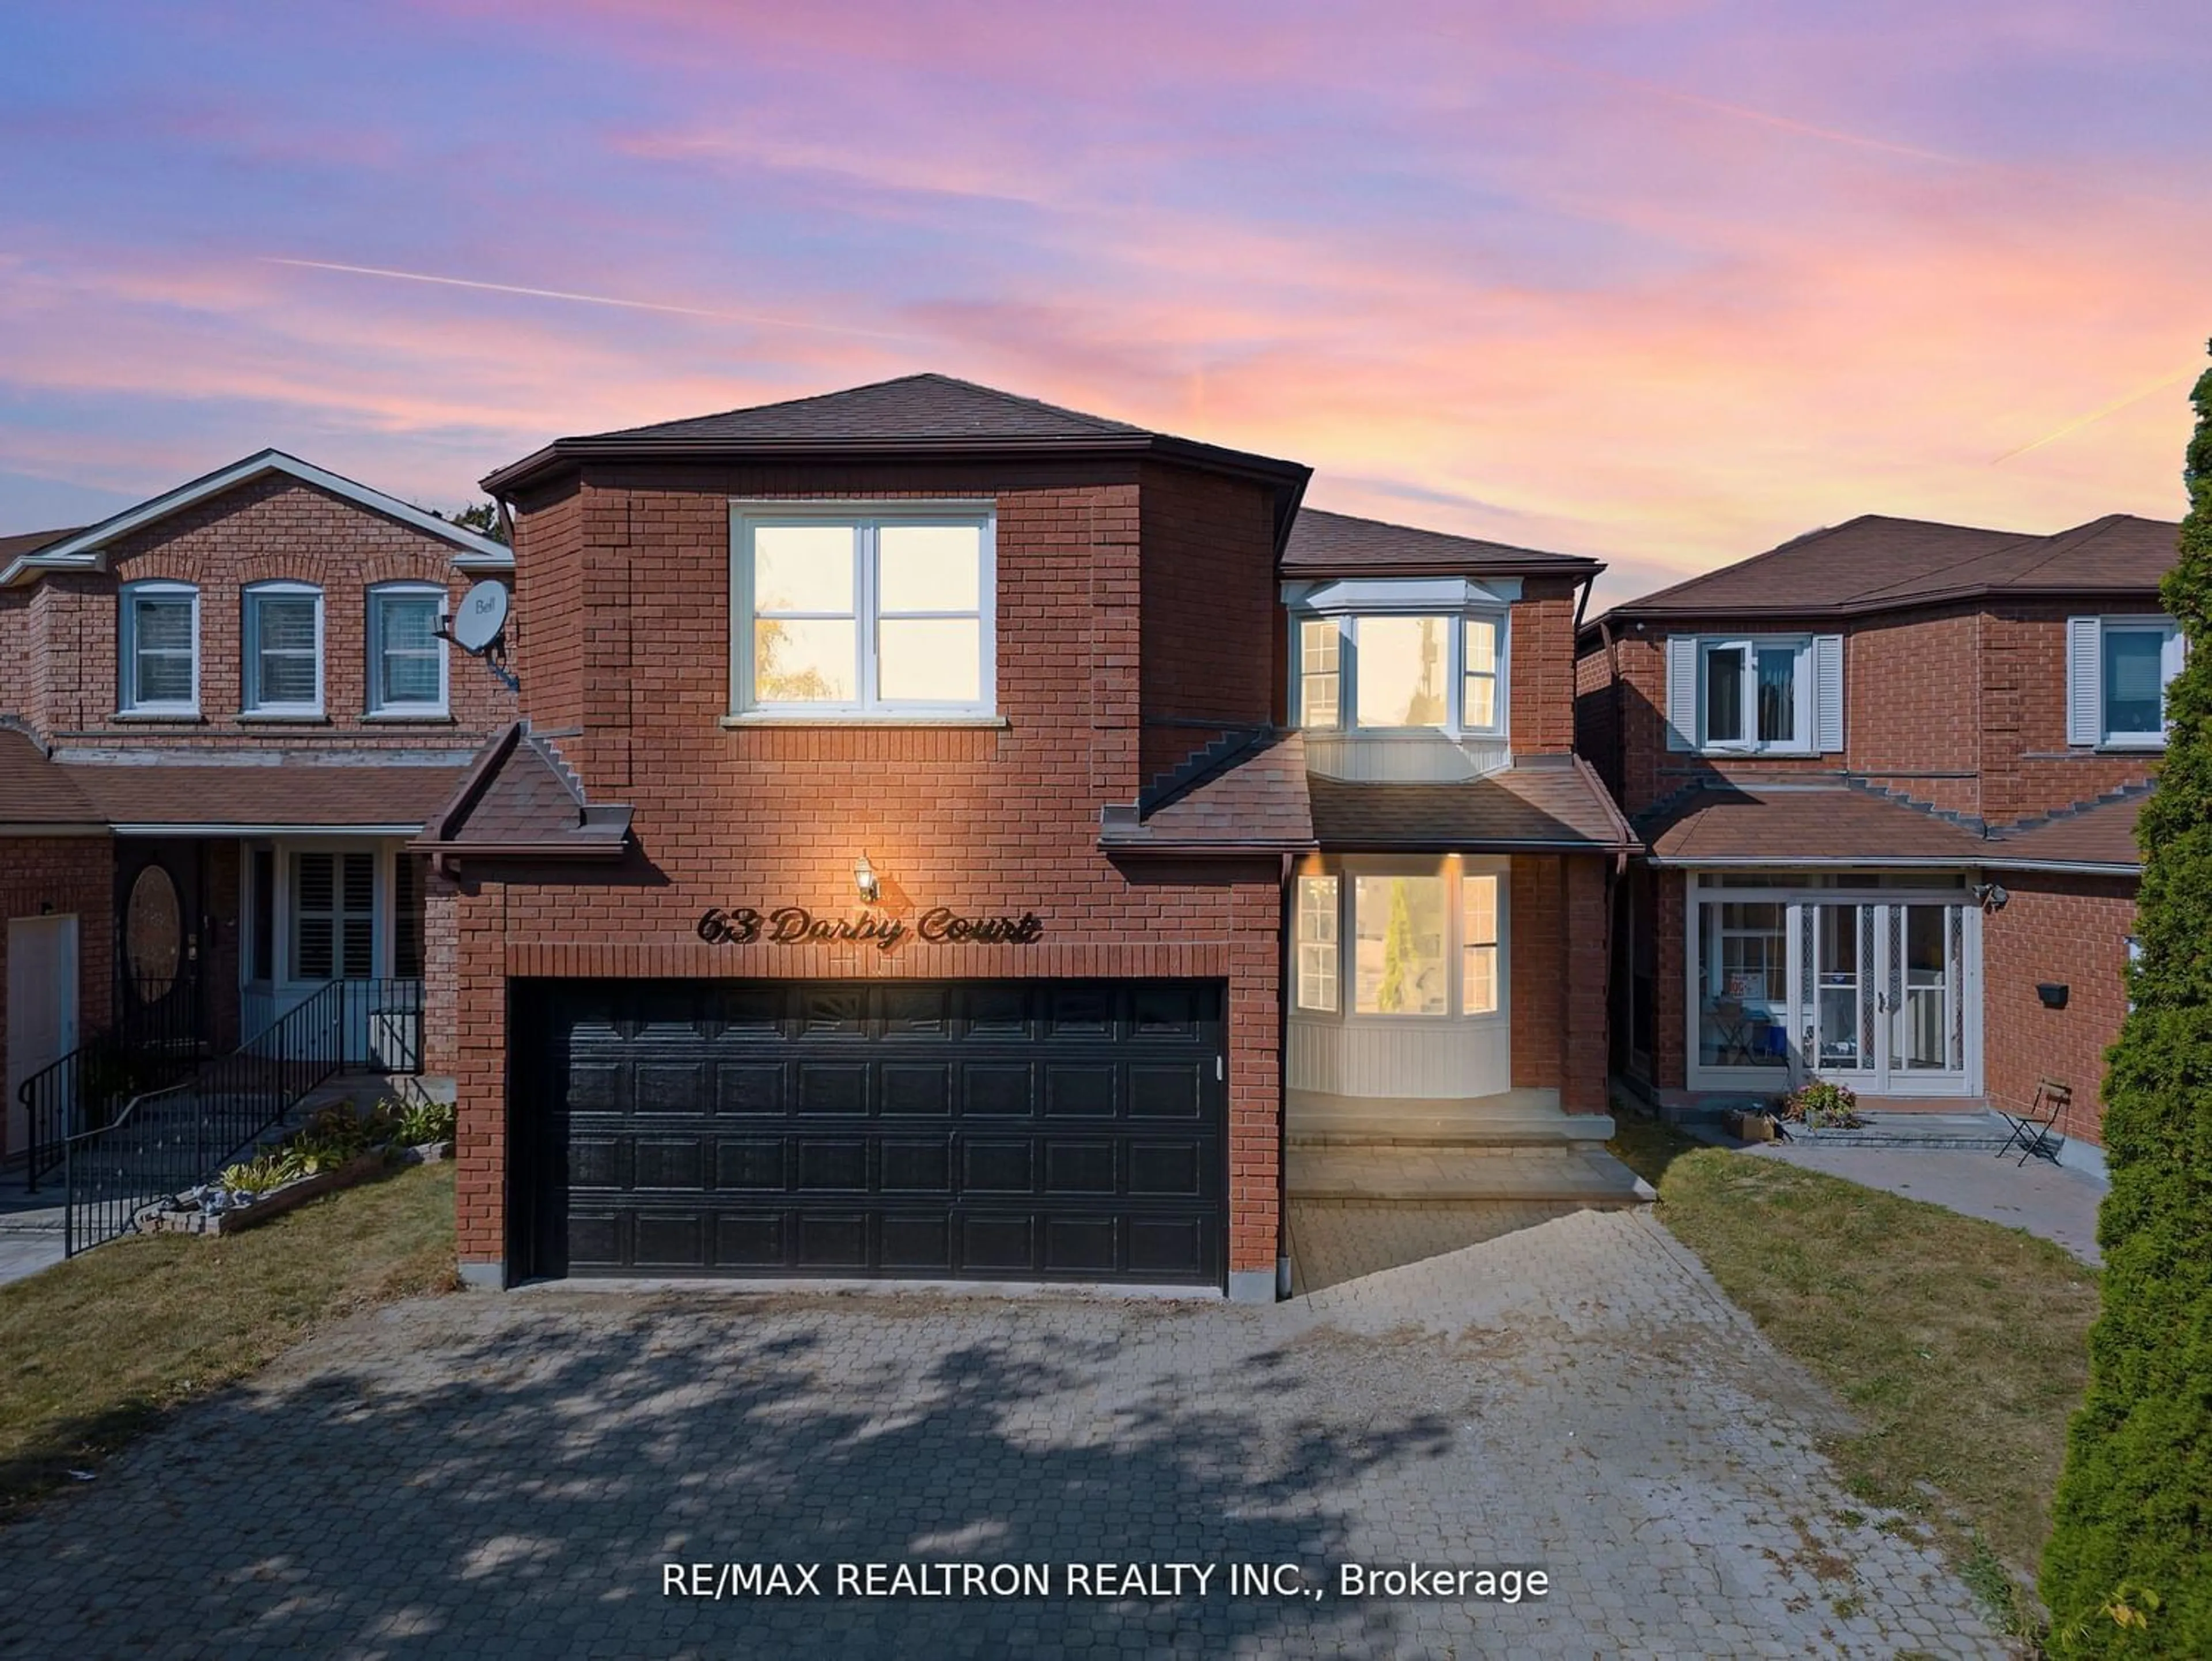 Home with brick exterior material for 63 Darby Crt, Toronto Ontario M1B 5H6